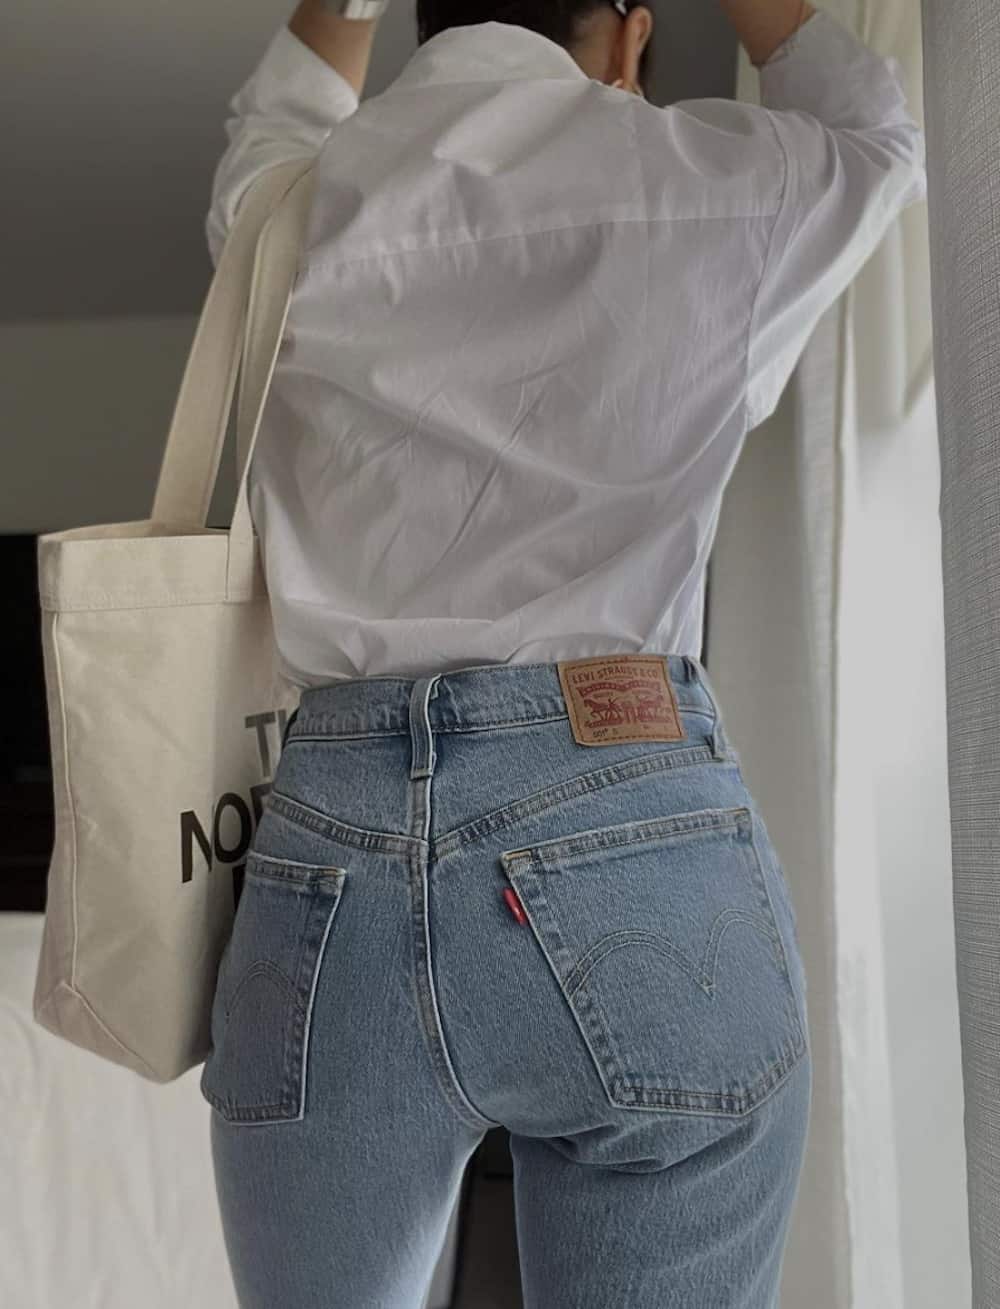 Woman wearing jeans, a white button down and a canvas bag.